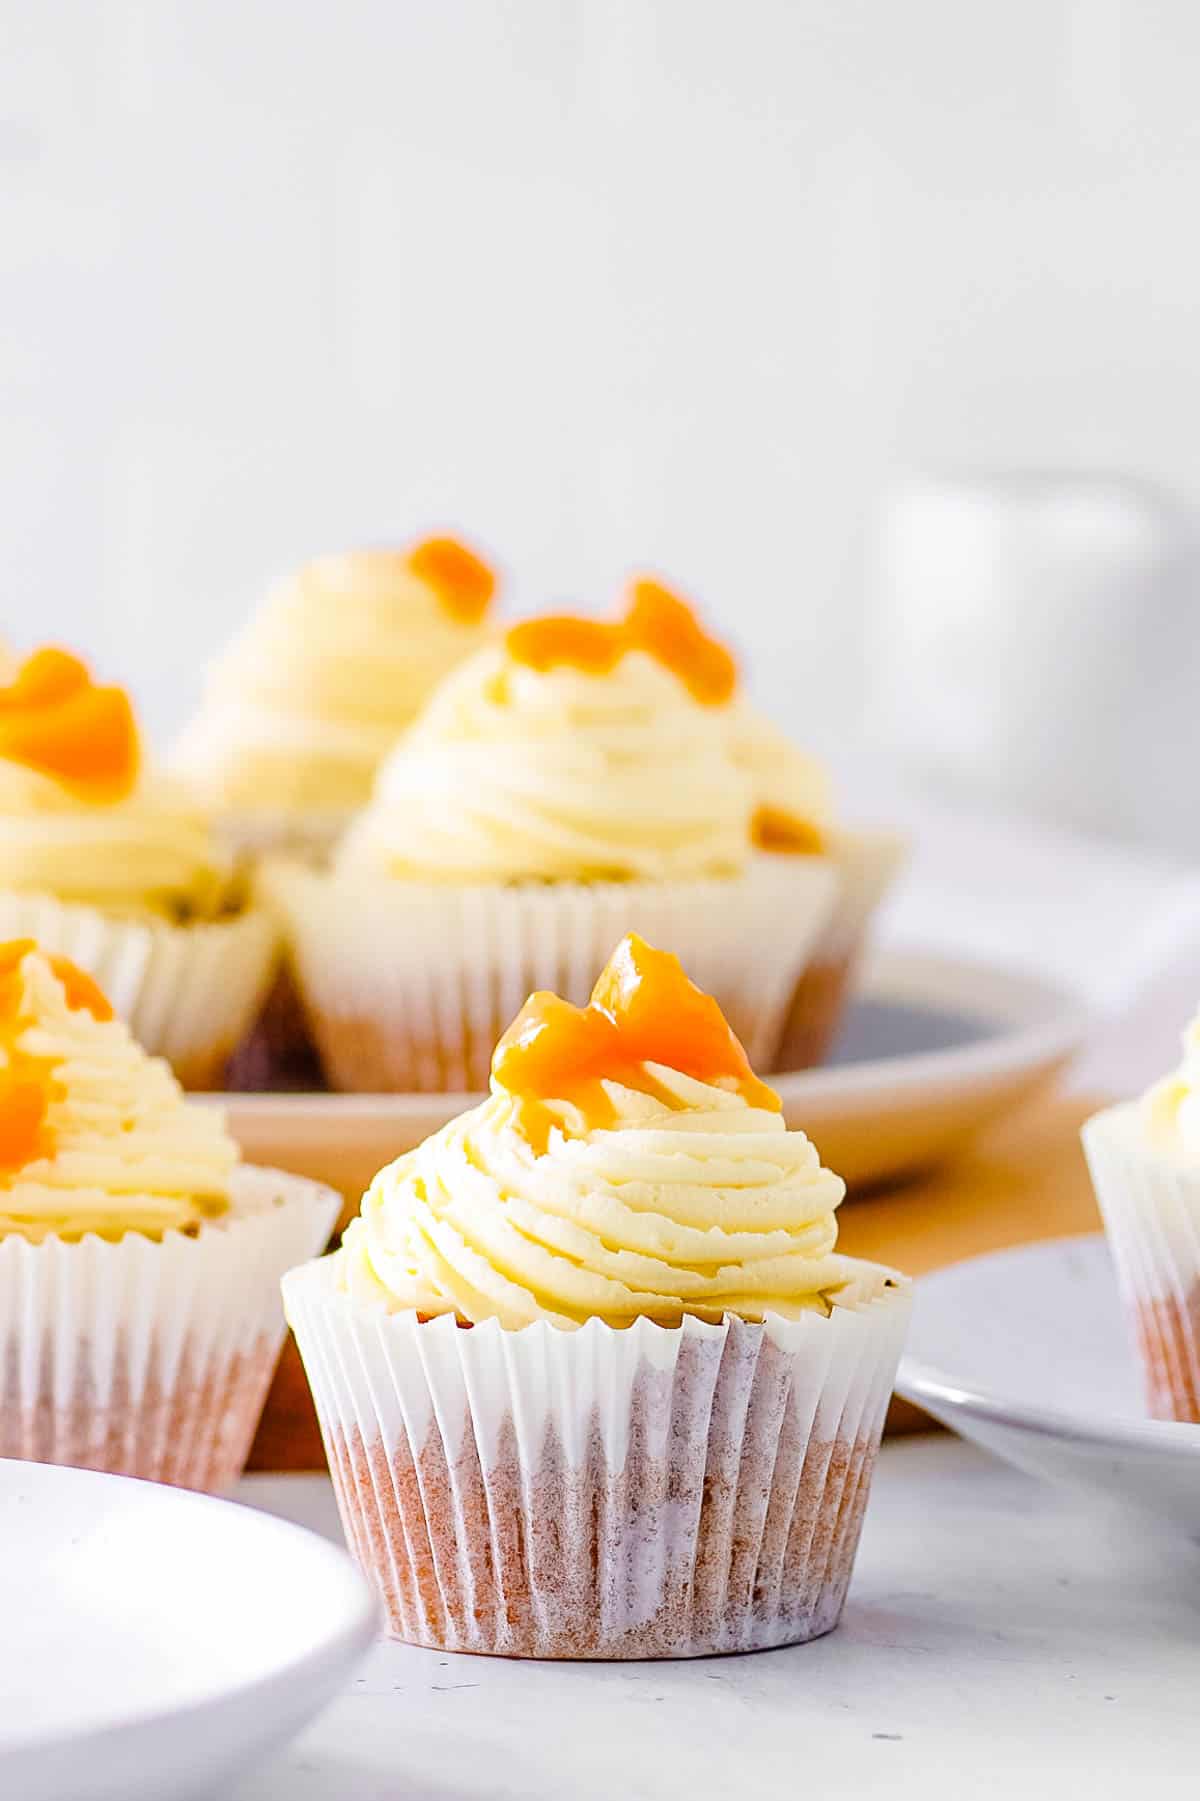 Peach cupcakes, topped with a vanilla ،ercream frosting and stewed peaches, on a white plate.